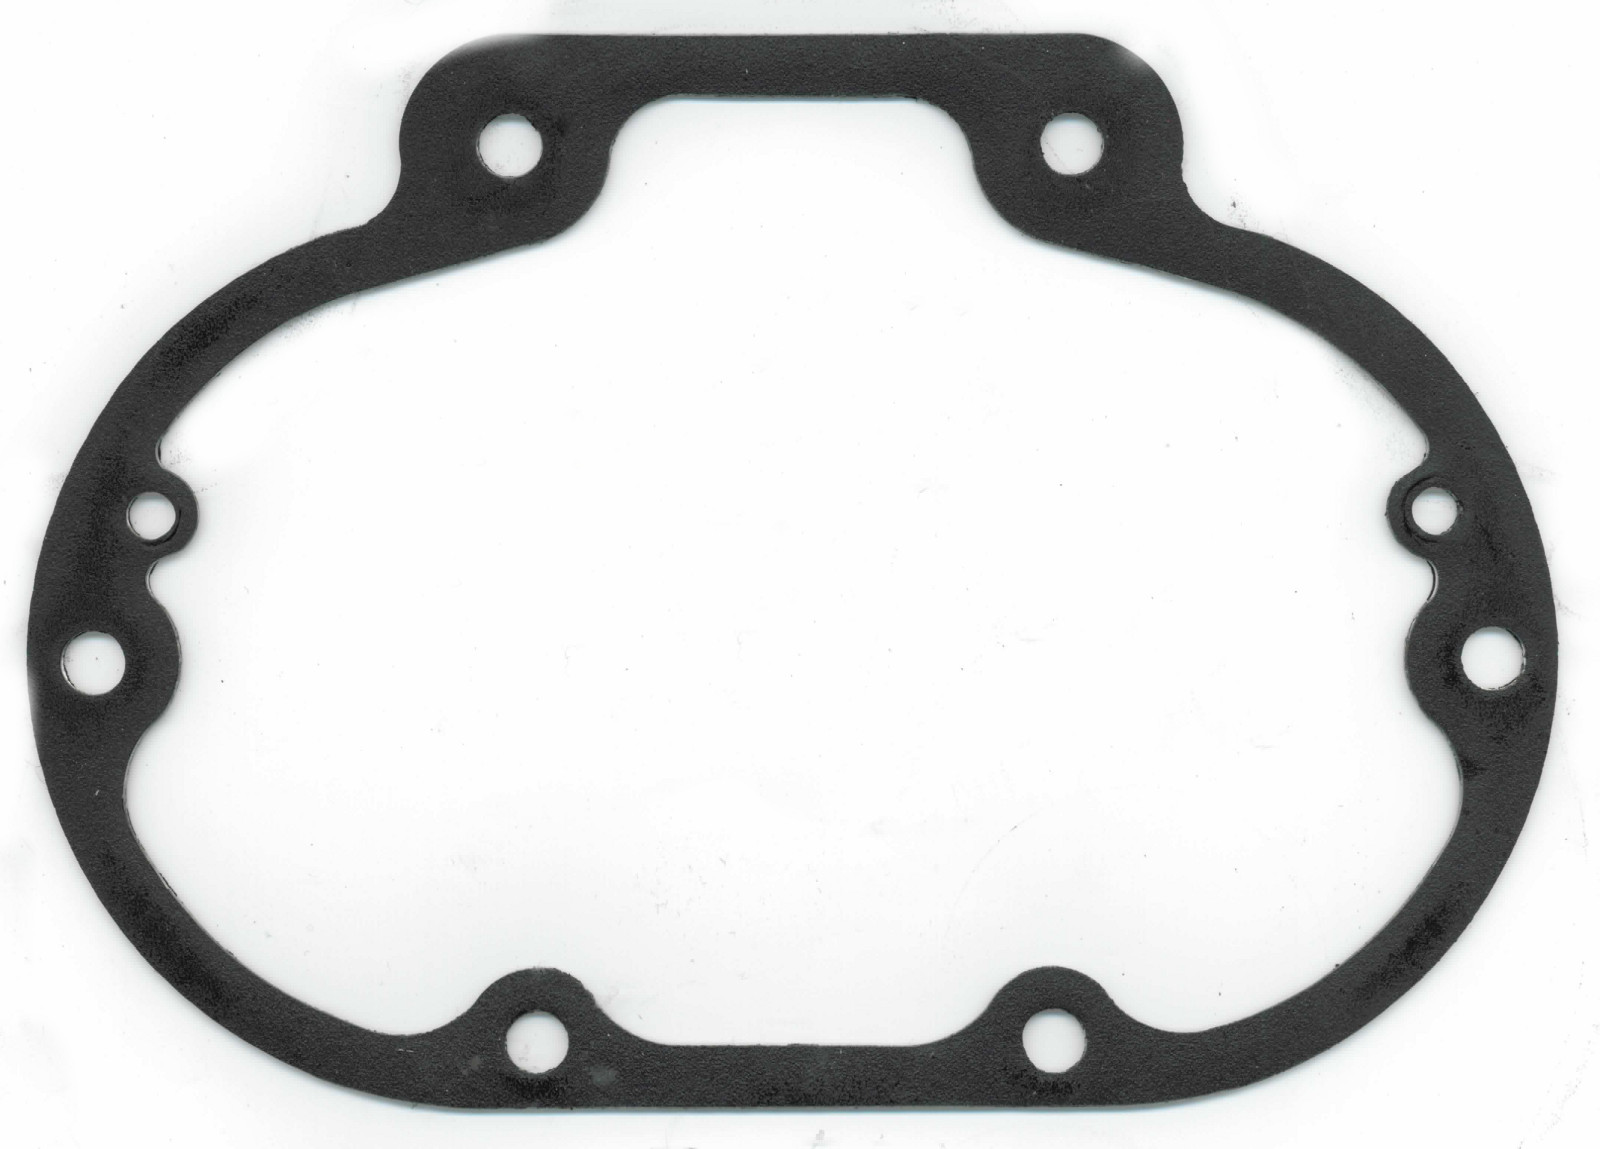 10 Pack Transmission End Cover Gasket Replaces 36805-06 - Harley Dyna & Twin Cam - Click Image to Close